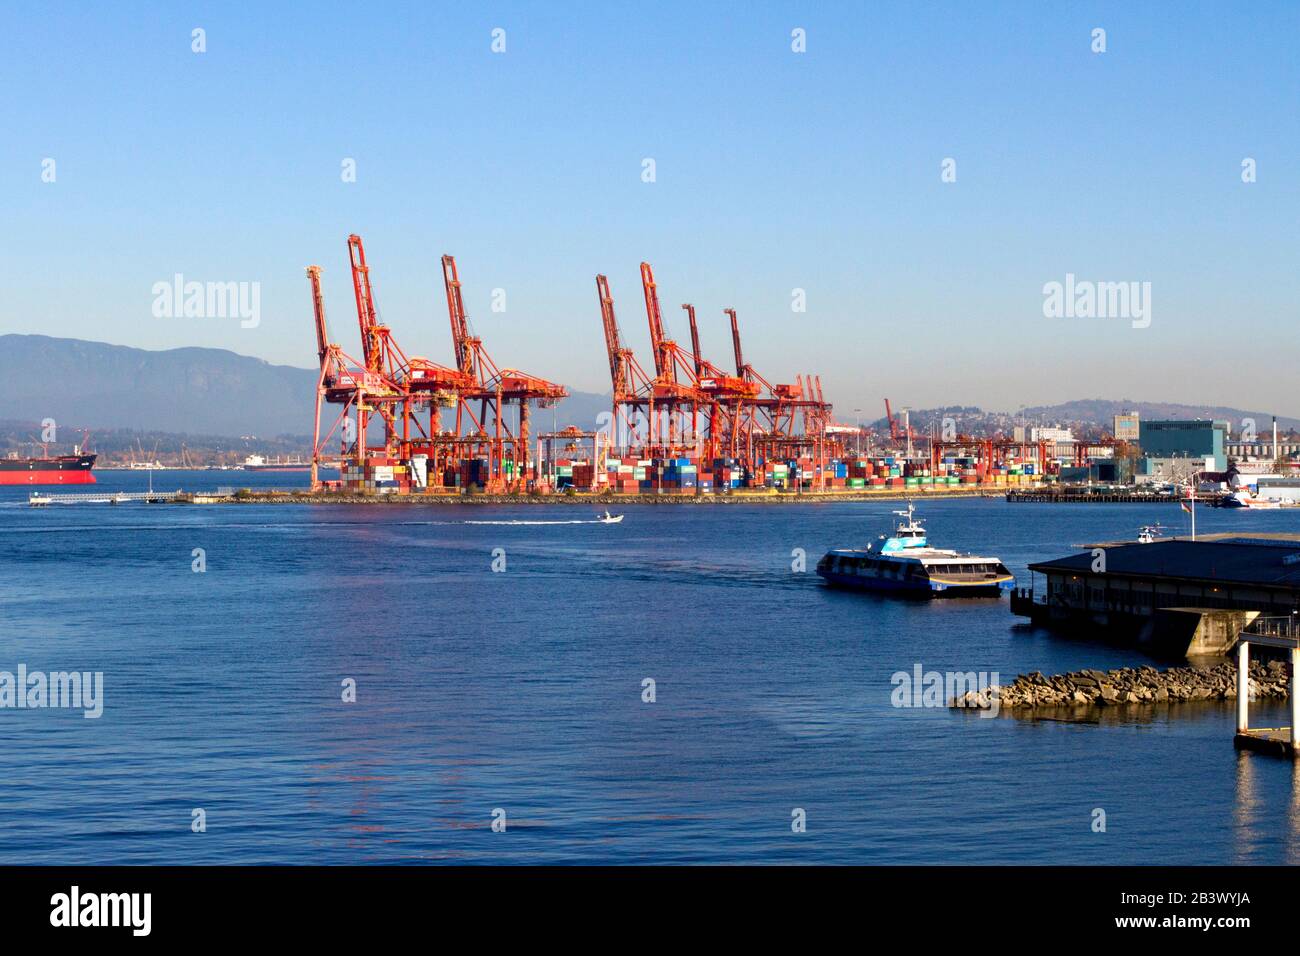 Gantry cranes at Port Metro Vancouver container terminal in the Burrard Inlet,Vancouver, BC, Canada and the SeaBus arriving at the Waterfront terminal Stock Photo